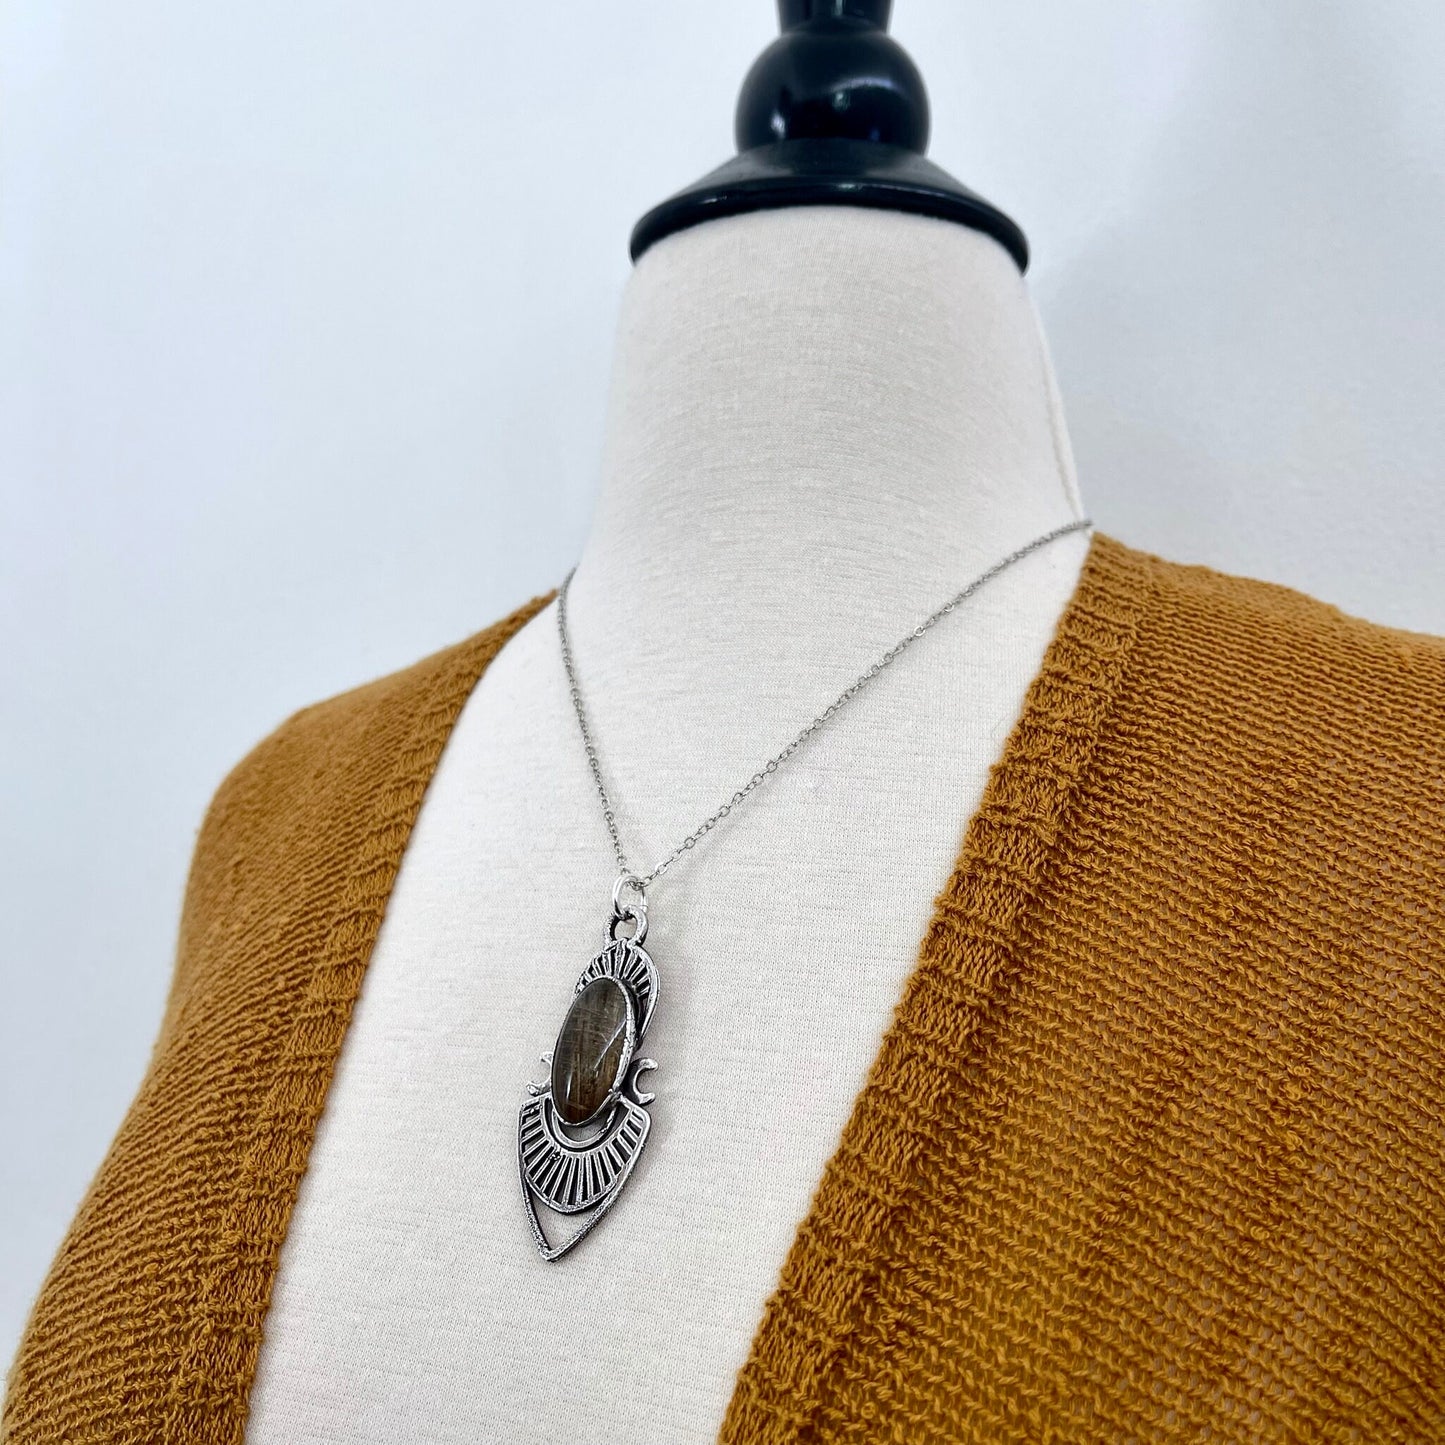 Moss & Moon Collection - Rutile Quartz Statement Necklace set in Fine Silver / One of a Kind - by Foxlark